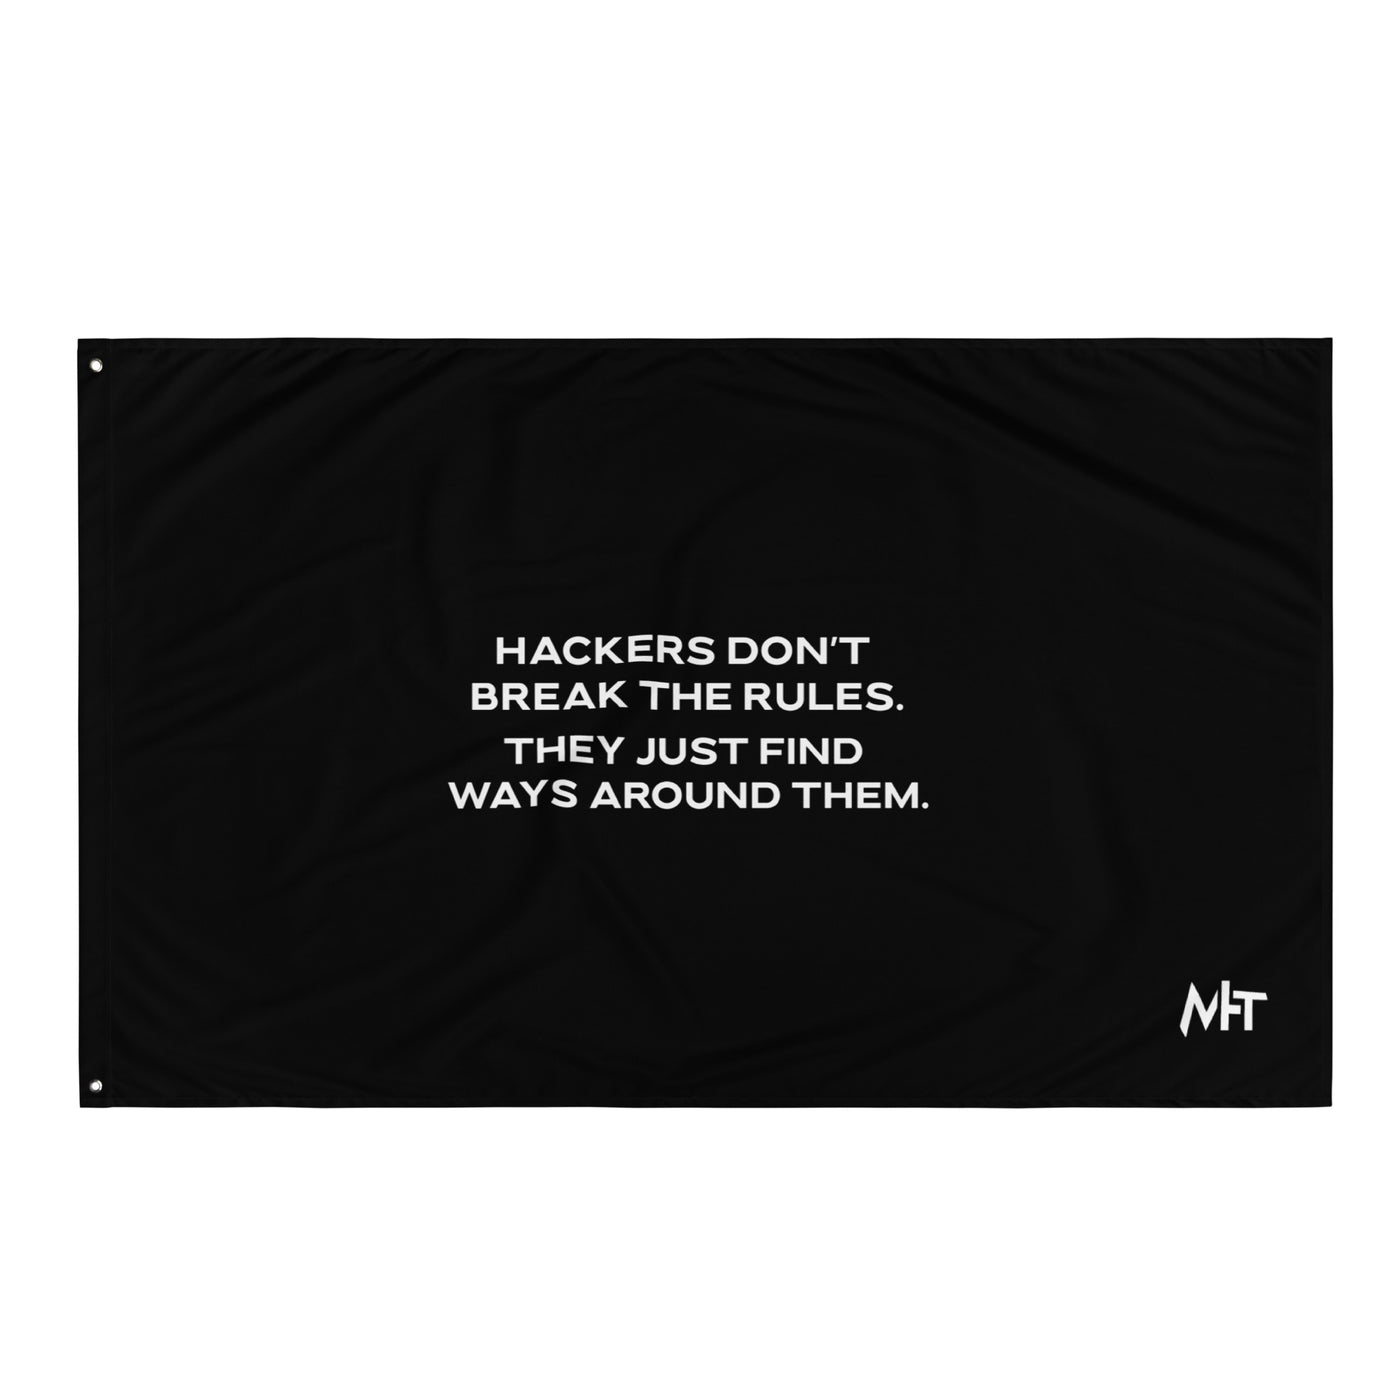 Hackers don't break the rules, they just find ways around them V2 - Flag